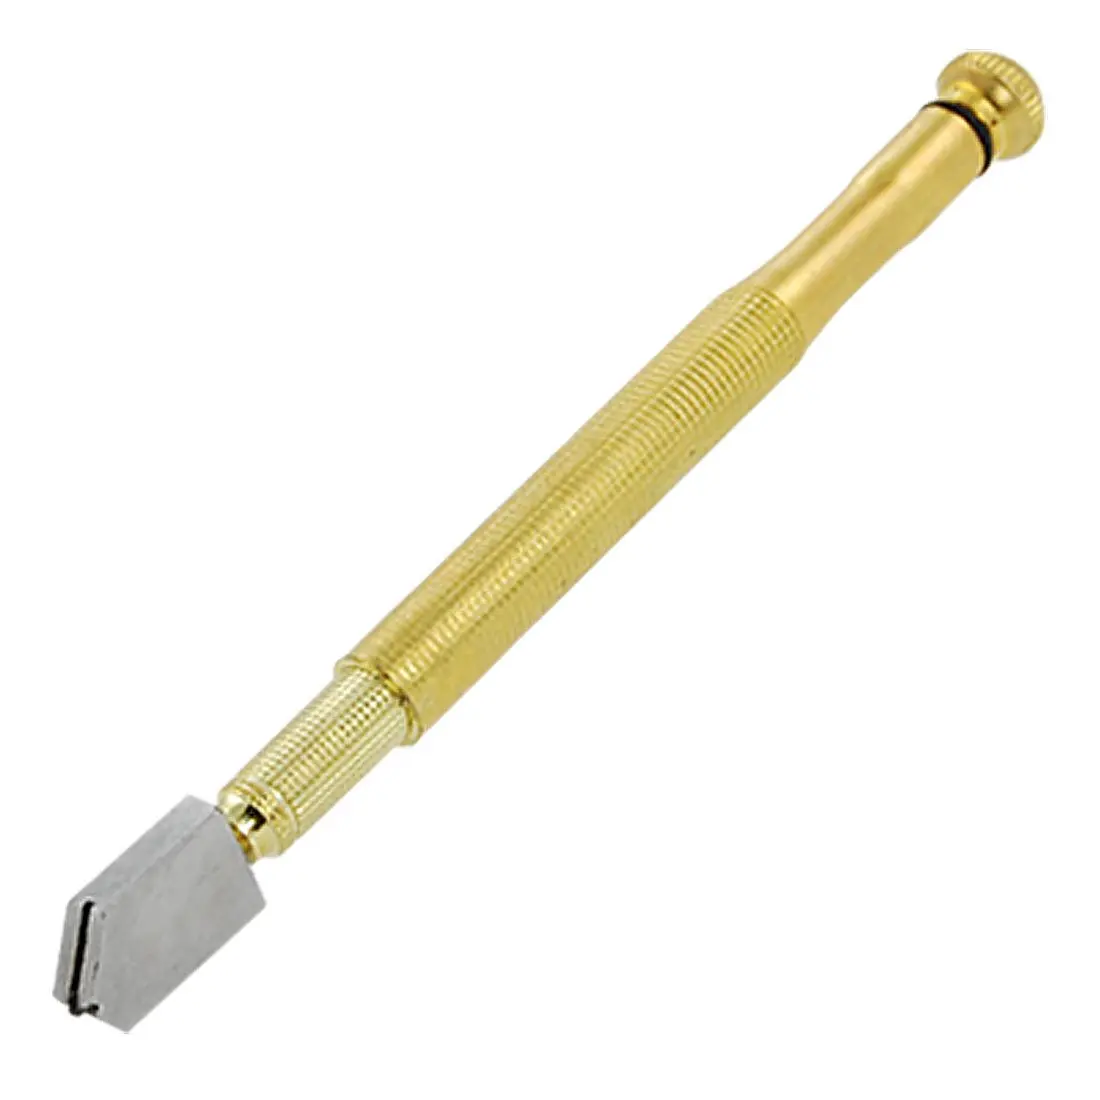 AYHF Manual Gold Tone Nonslip Grip Oil Feed Glass Cutter Tool-in Glass